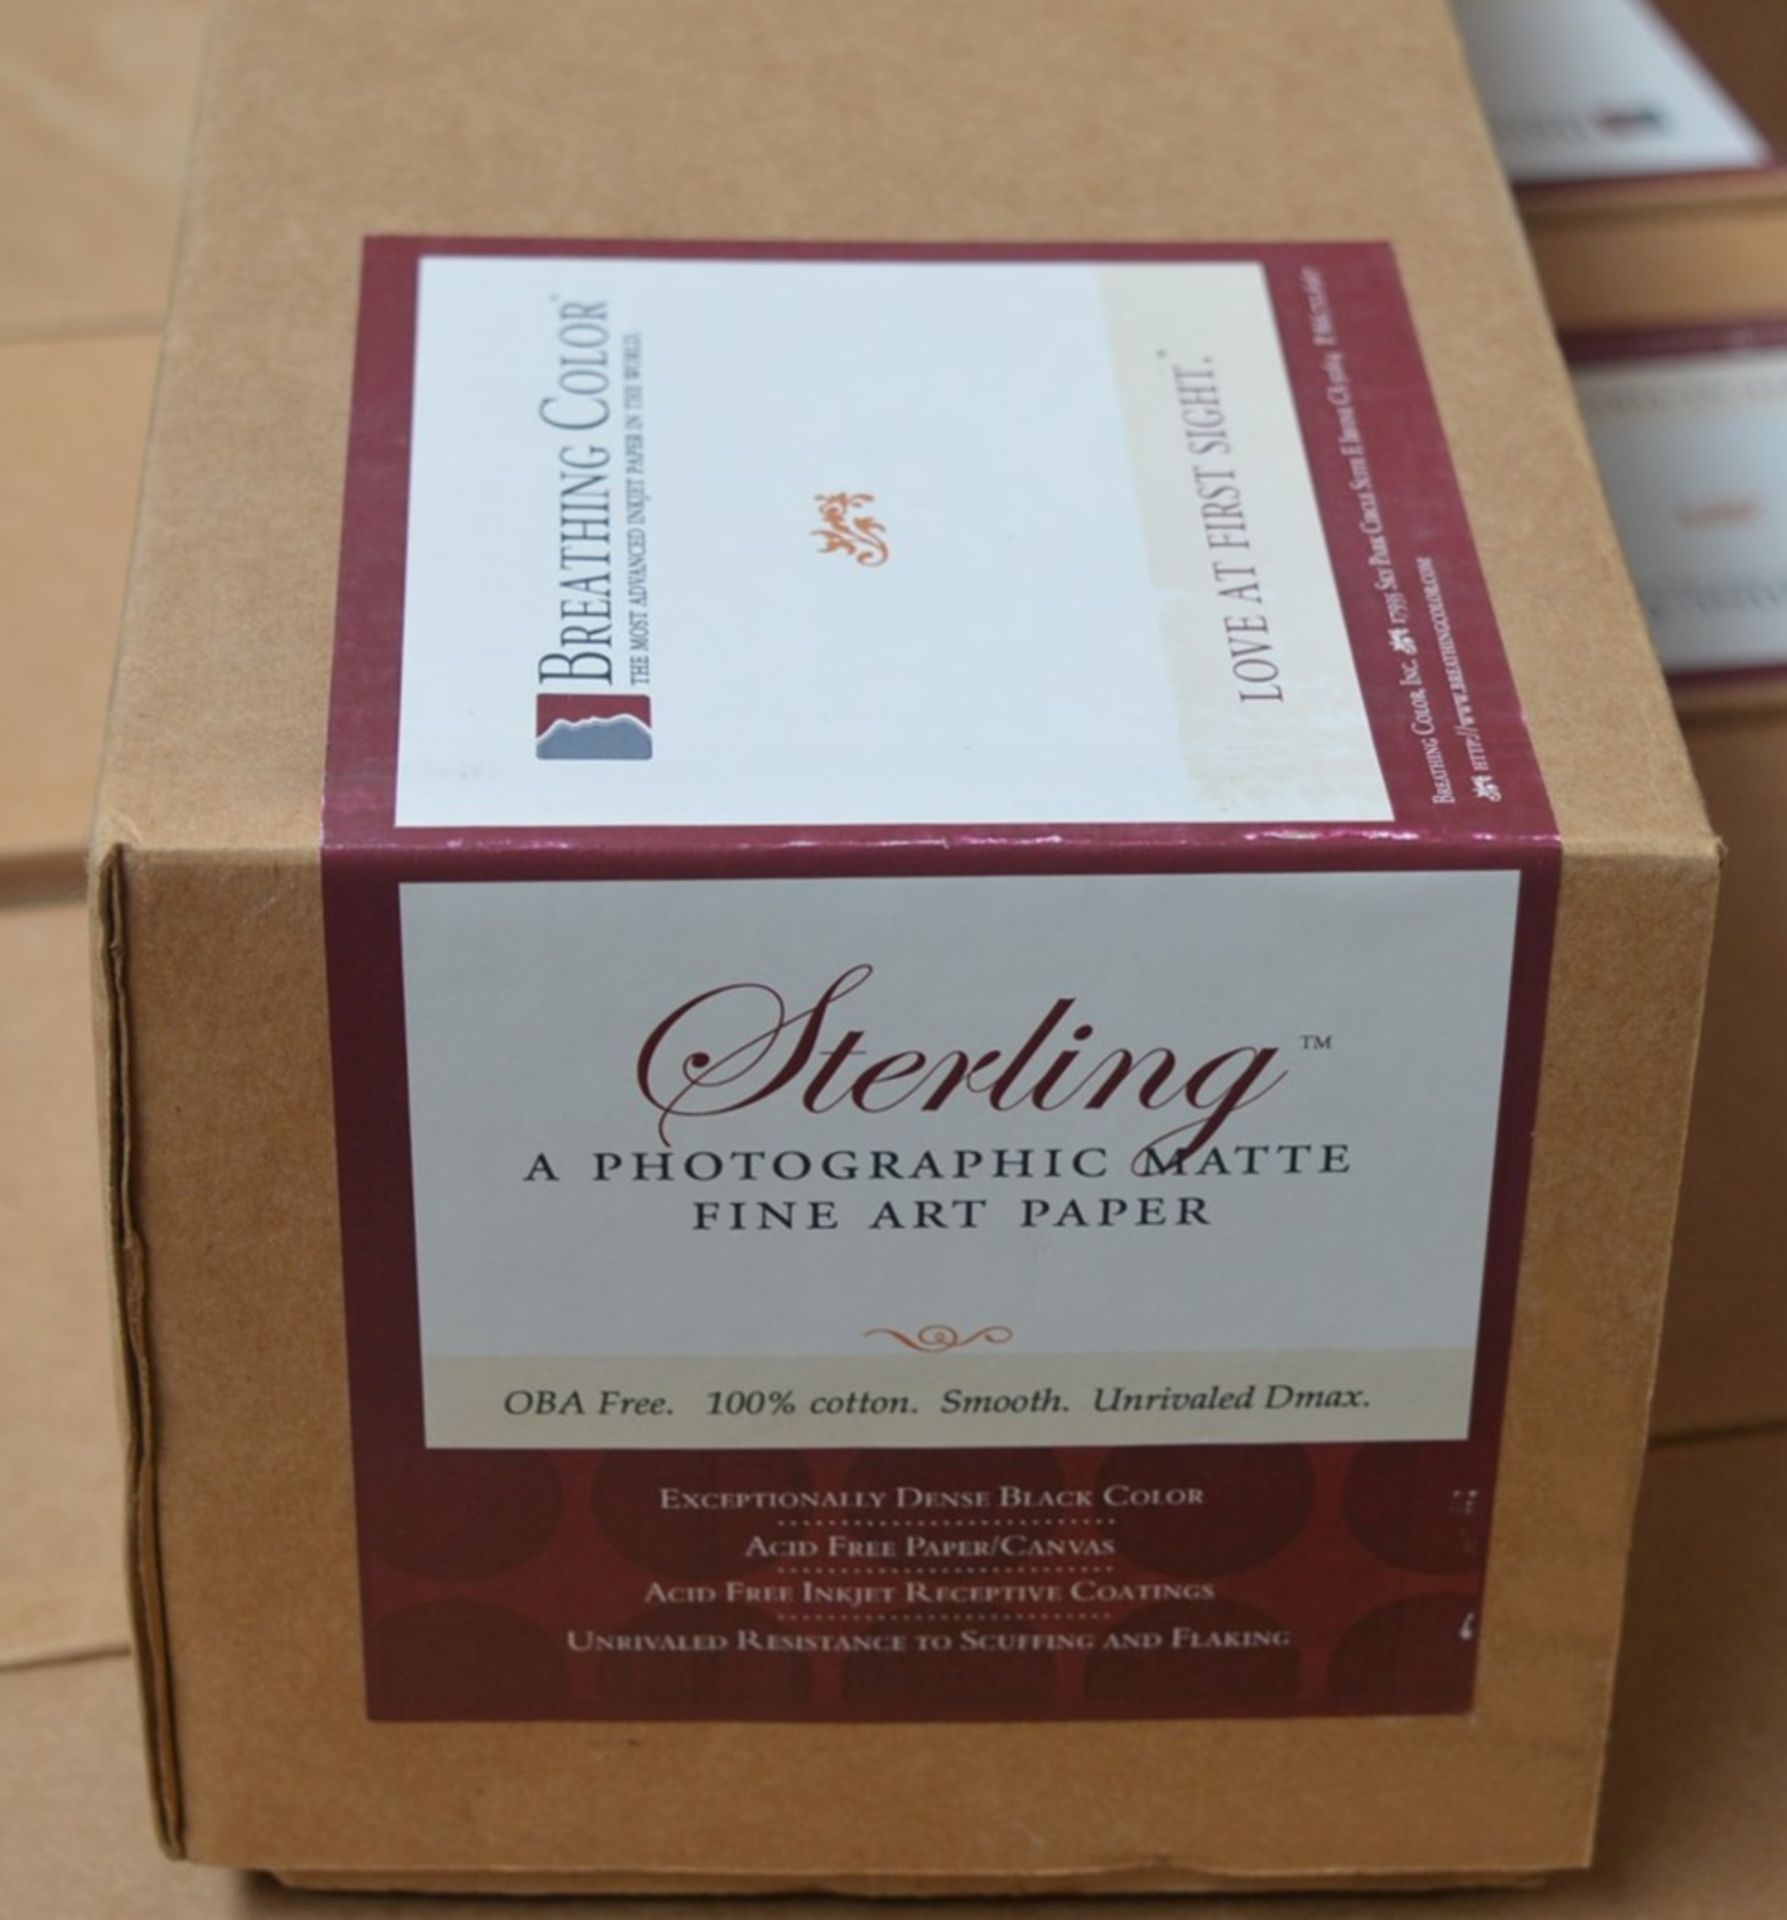 1 x Roll of Breathing Colour STERLING Photographic Matte Fine Art Paper - Size 24" x 50' - - Image 4 of 5